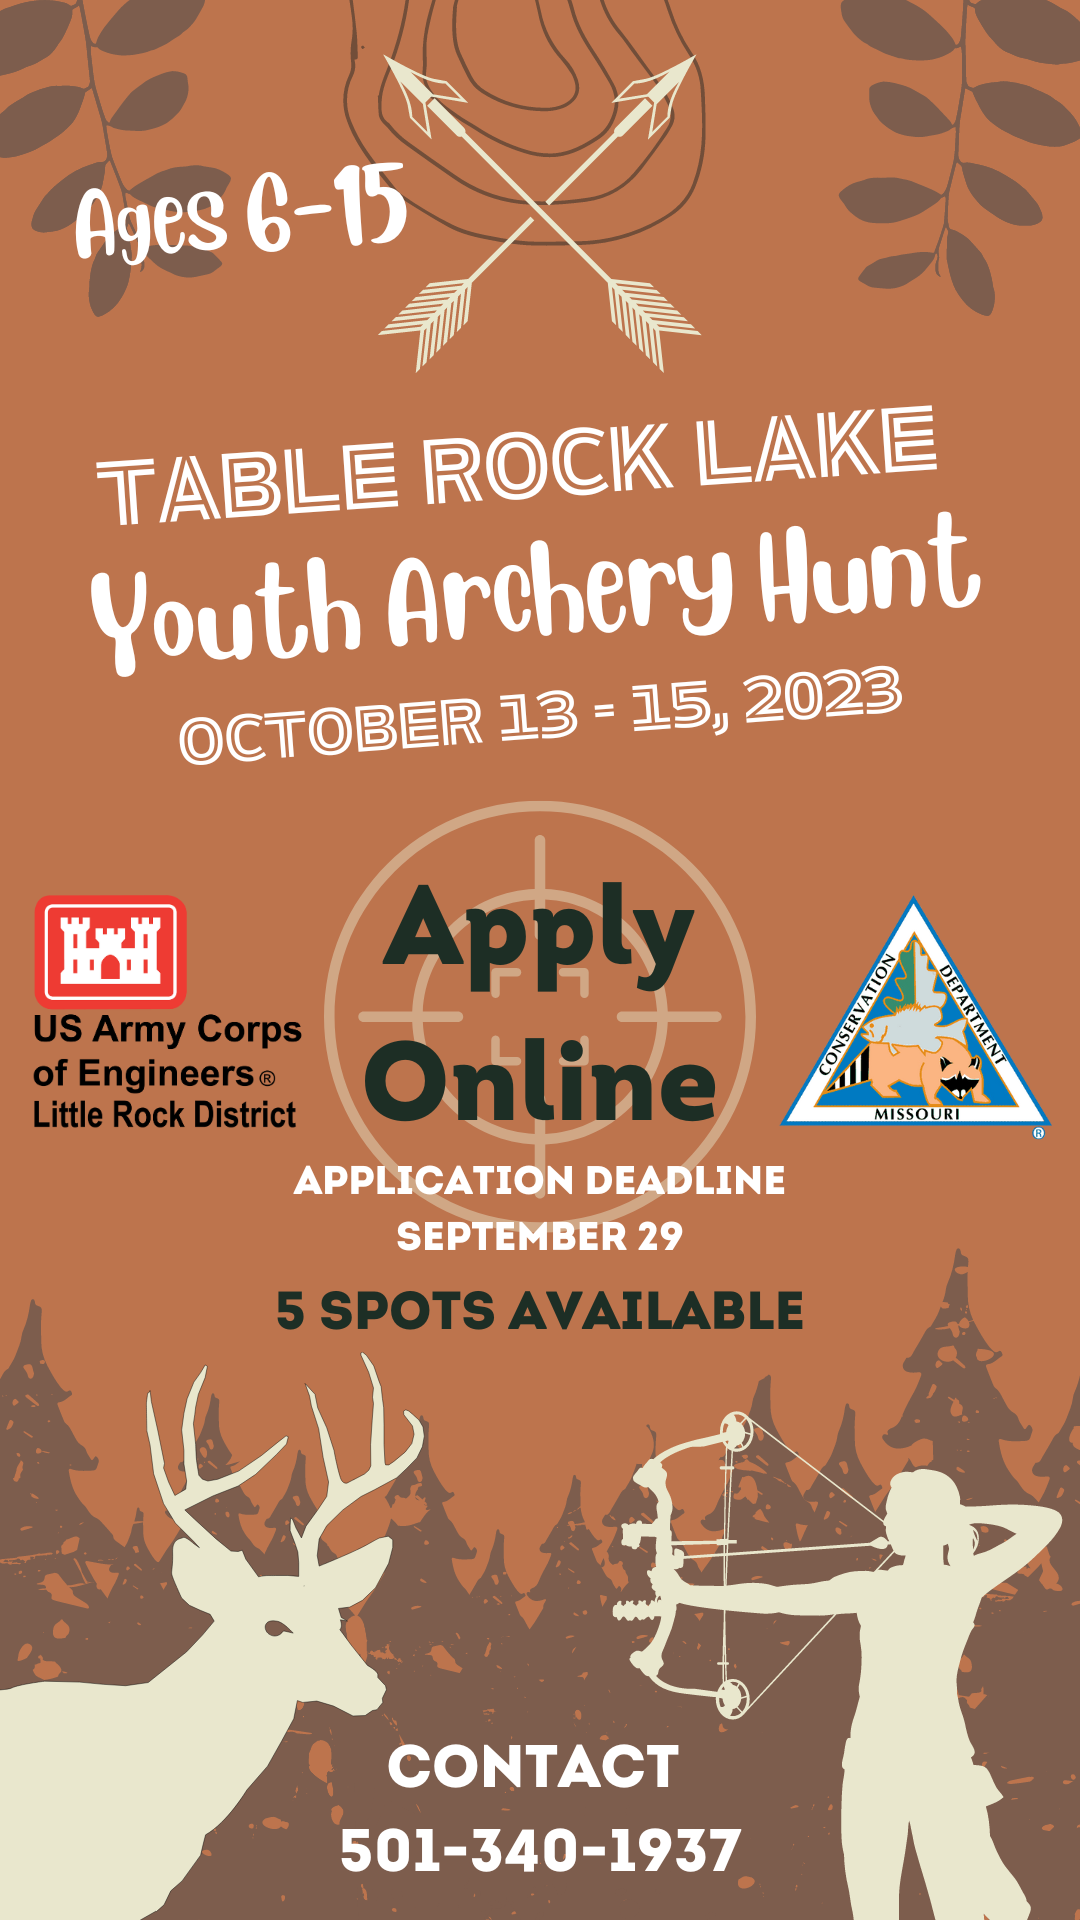 graphic for youth archery hunt at table rock lake